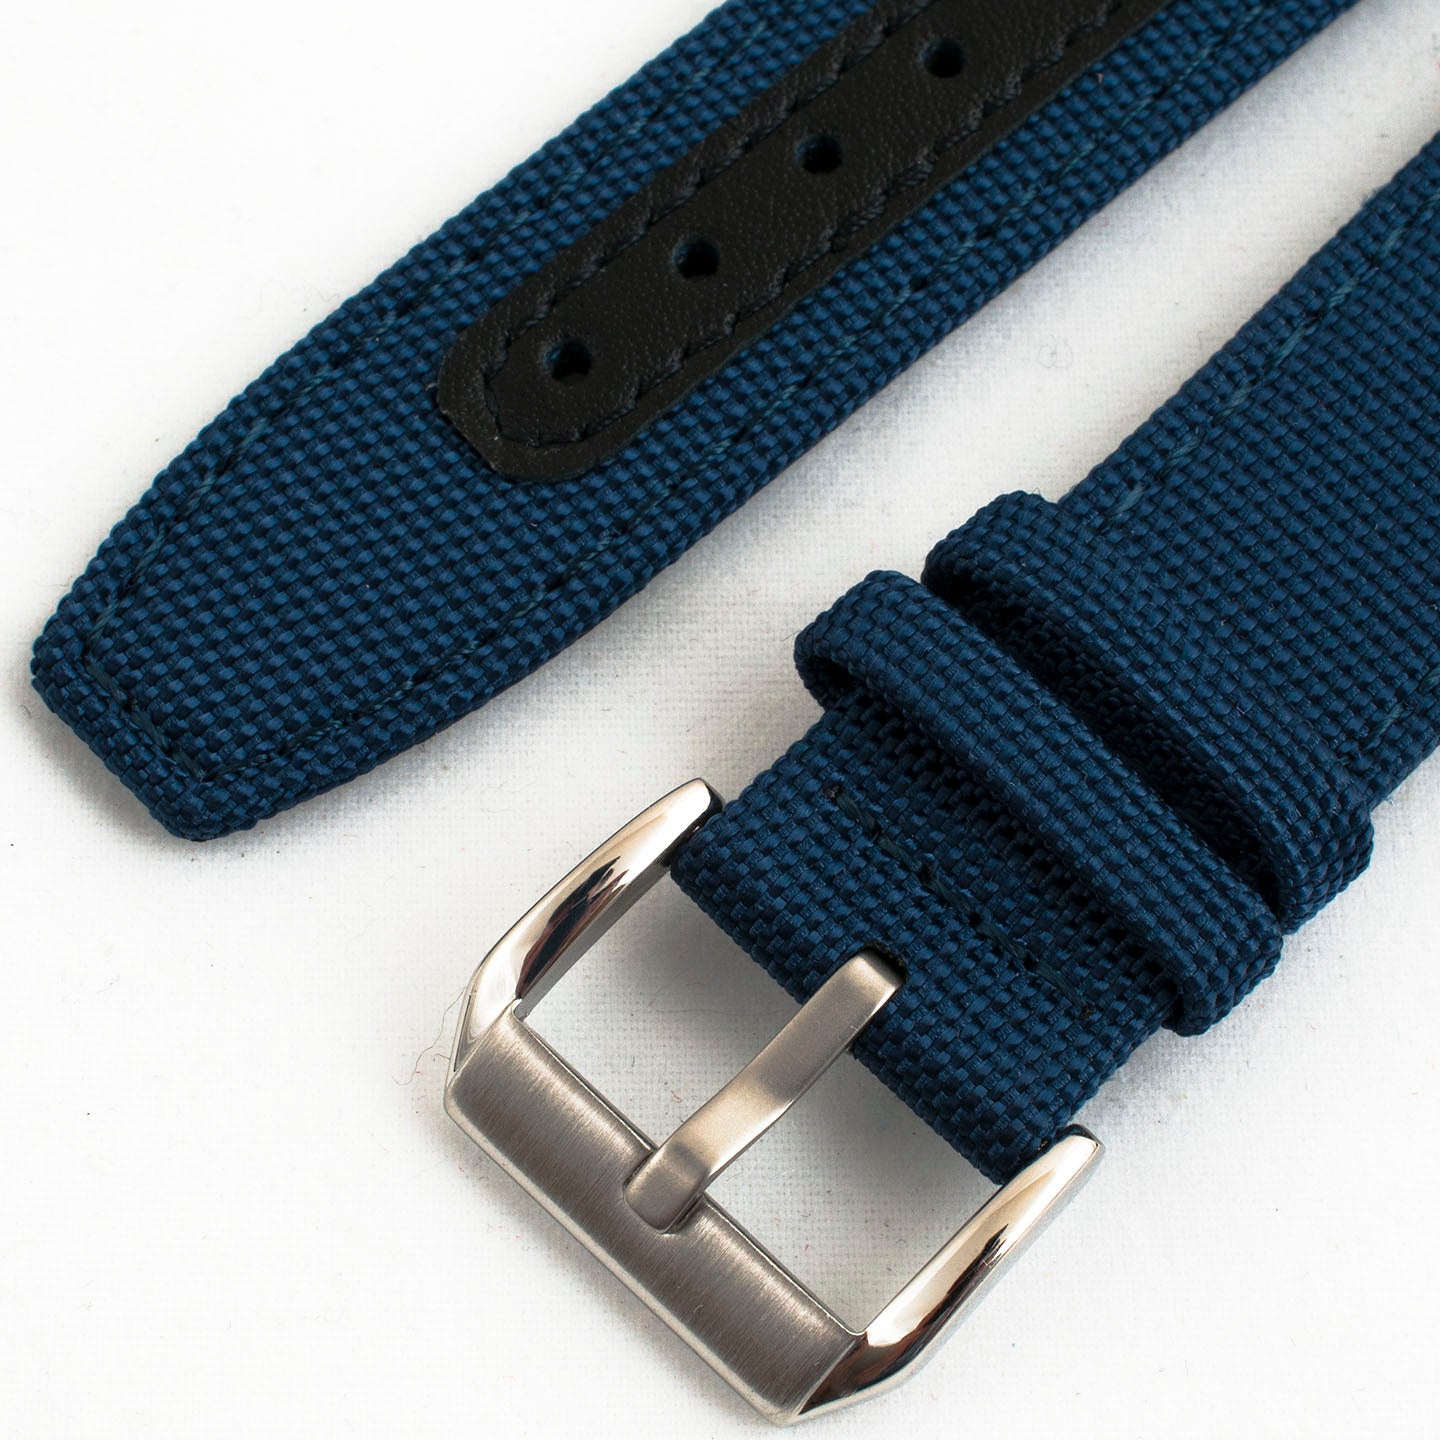 Premium Sailcloth quick release watch strap band replacement 19mm, 20mm, 21mm, 22mm blue